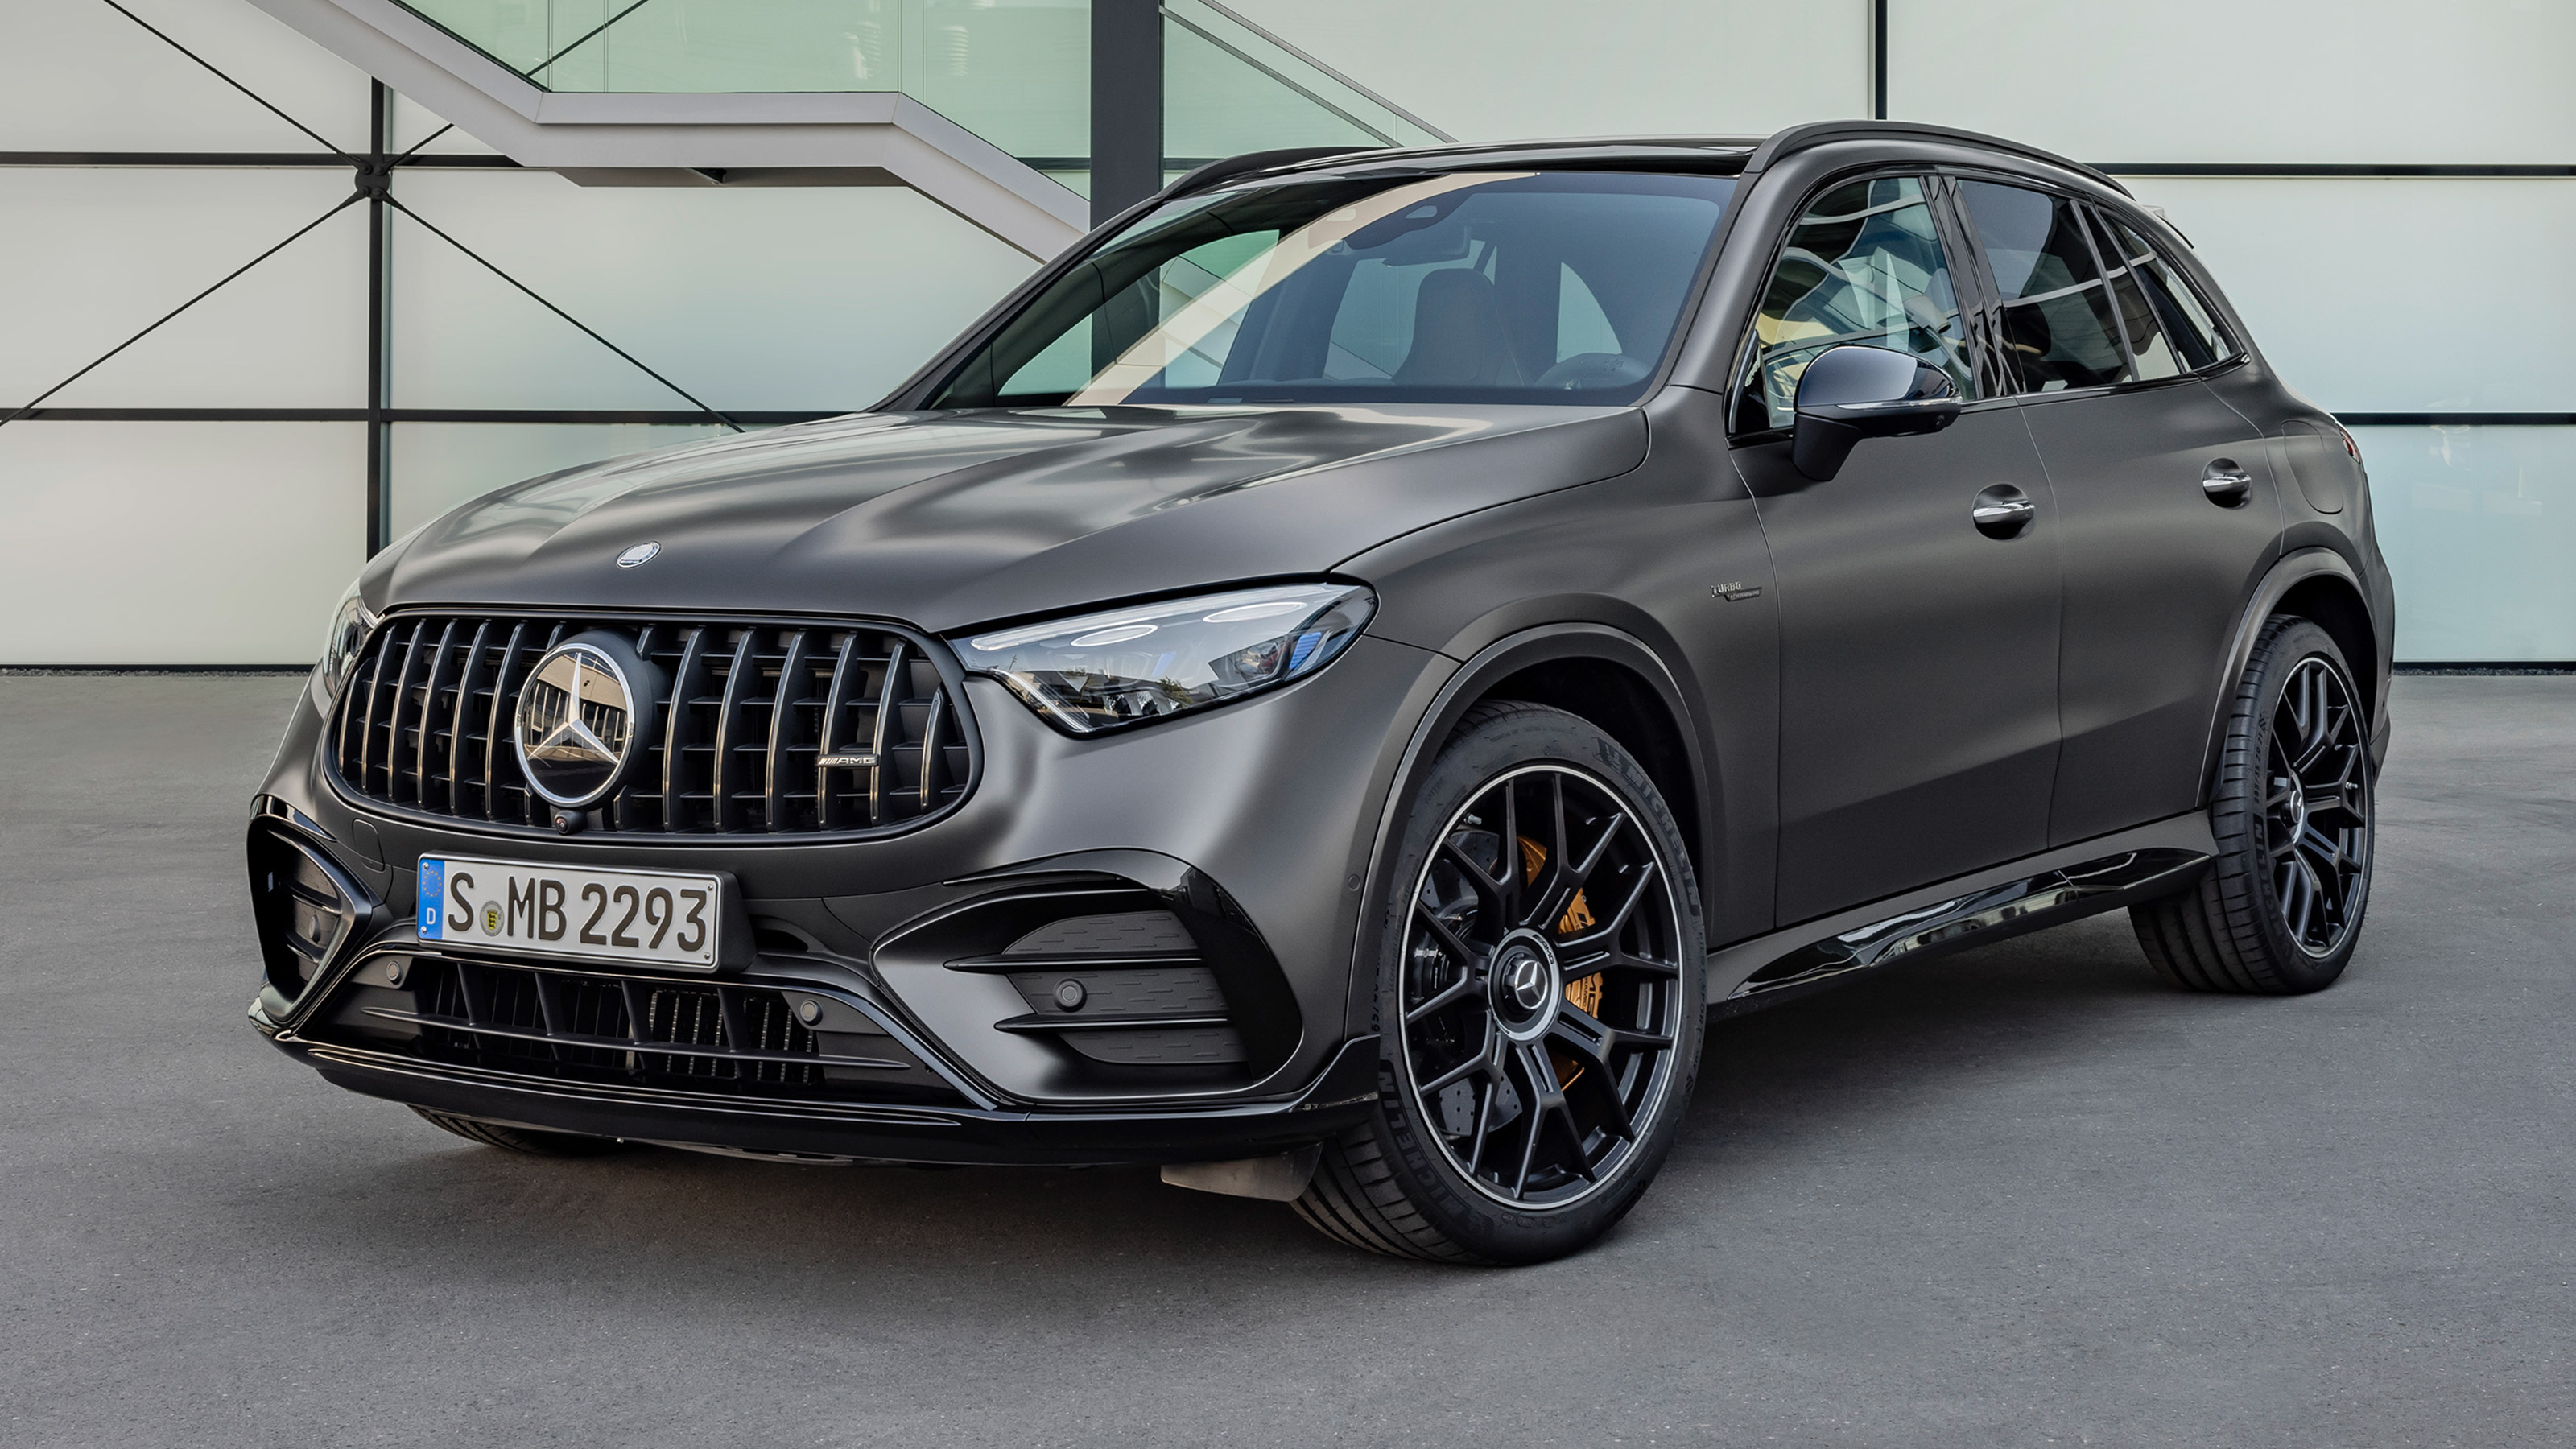 New Mercedes-AMG GLC63 S E Performance, GLC43 Debut In Coupe Trim